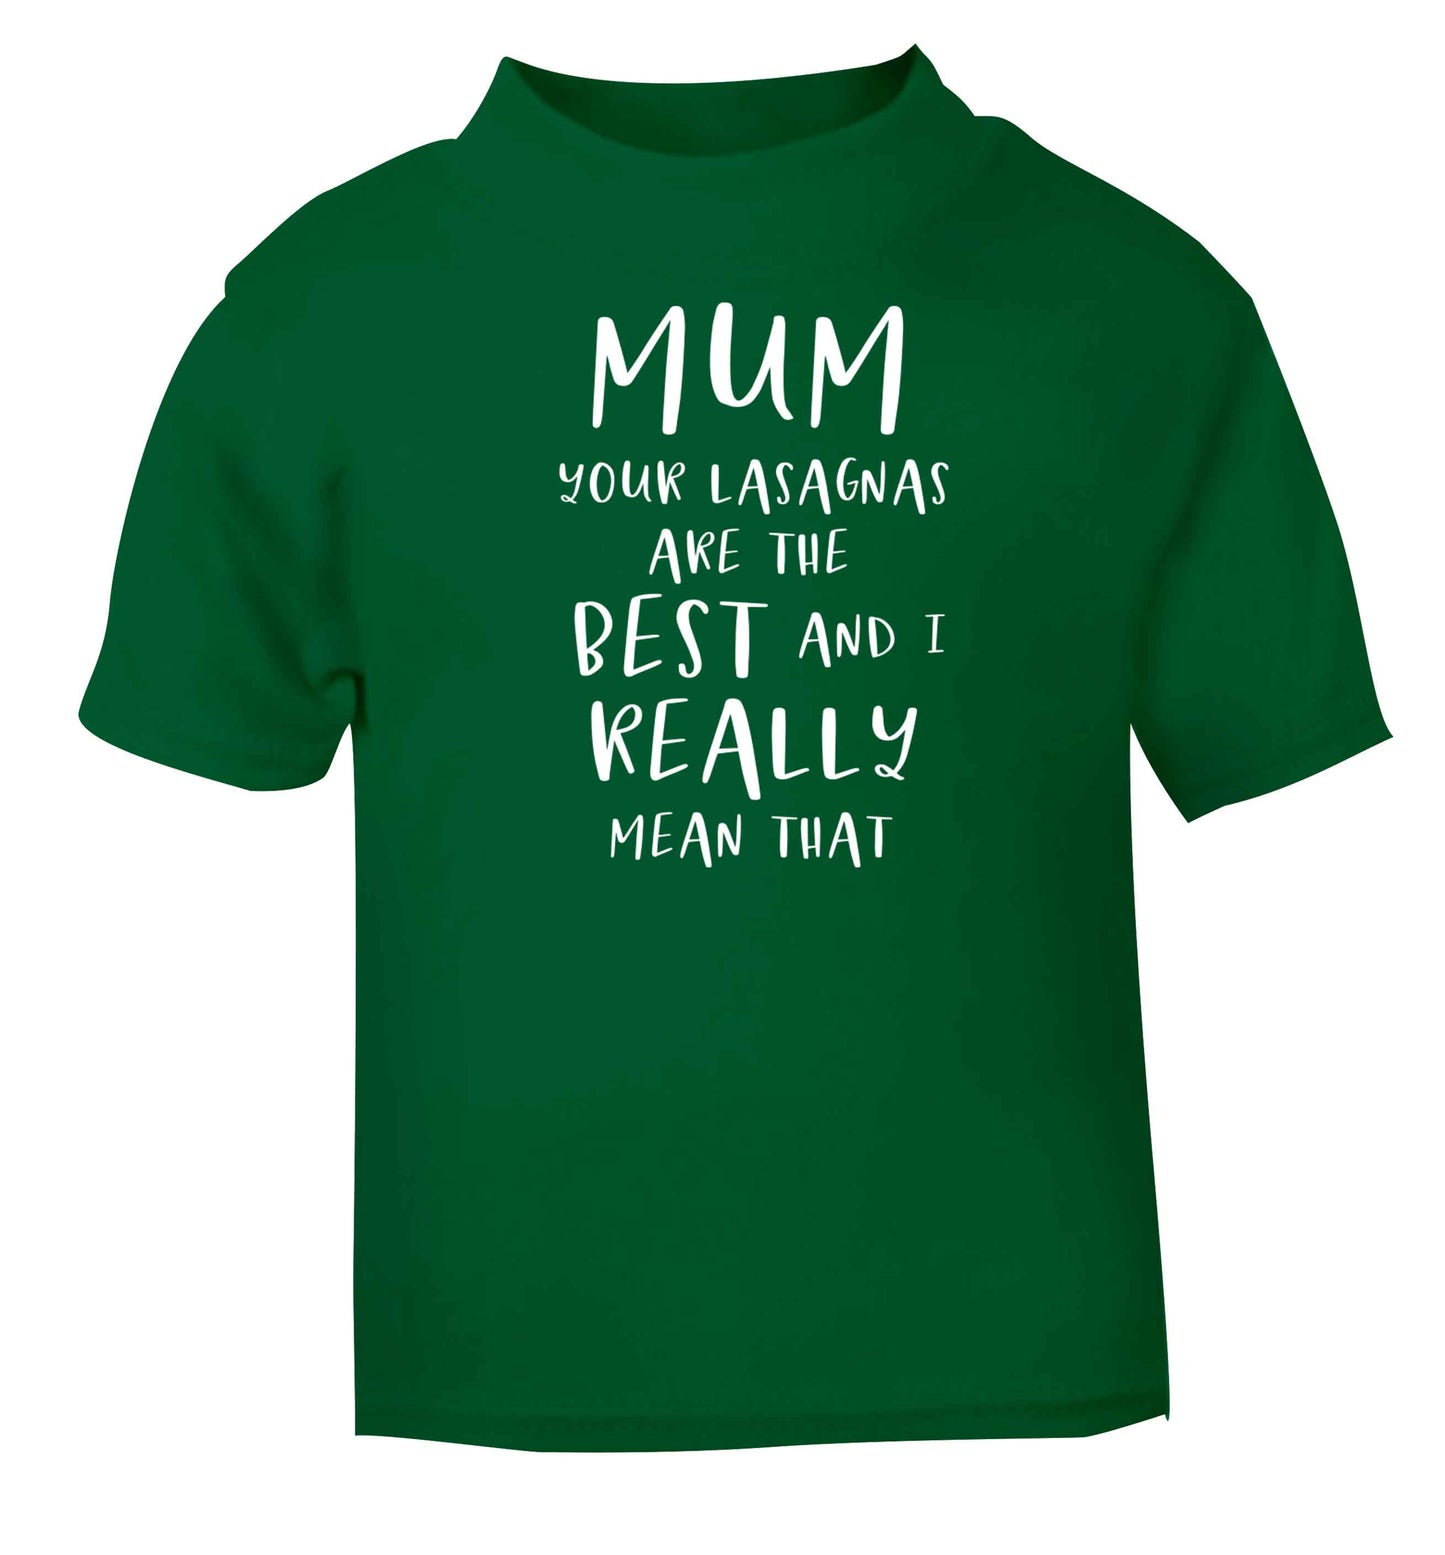 Funny gifts for your mum on mother's dayor her birthday! Mum your lasagnas are the best and I really mean that green baby toddler Tshirt 2 Years